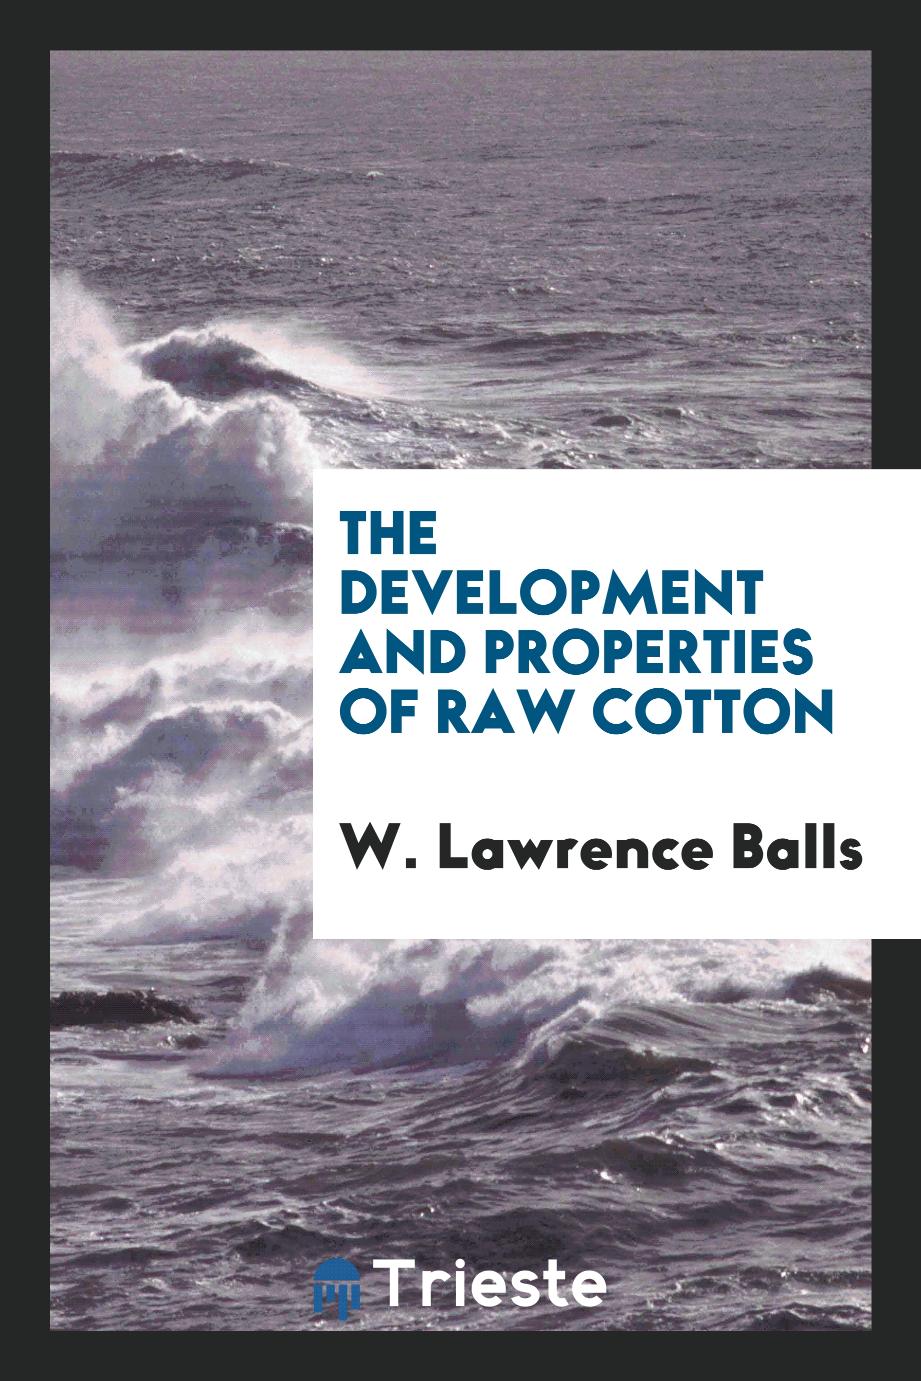 W. Lawrence Balls - The Development and Properties of Raw Cotton